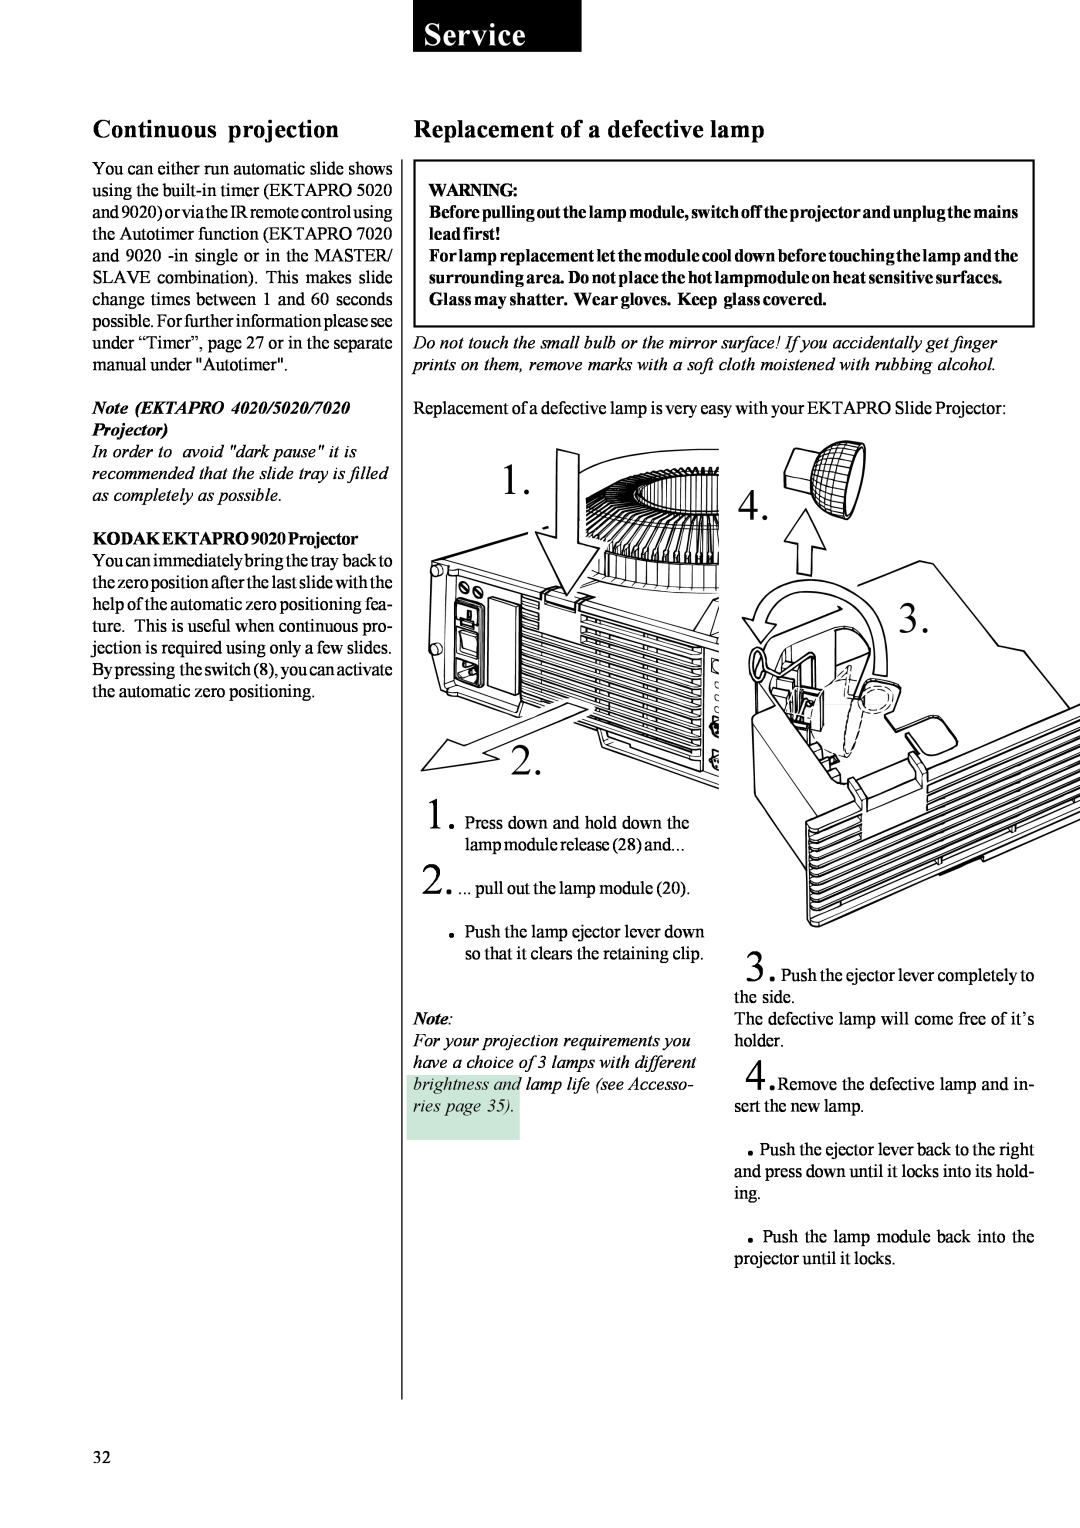 Kodak 4020, 9020, 7020, 5020 instruction manual Service, Continuous projection, Replacement of a defective lamp 